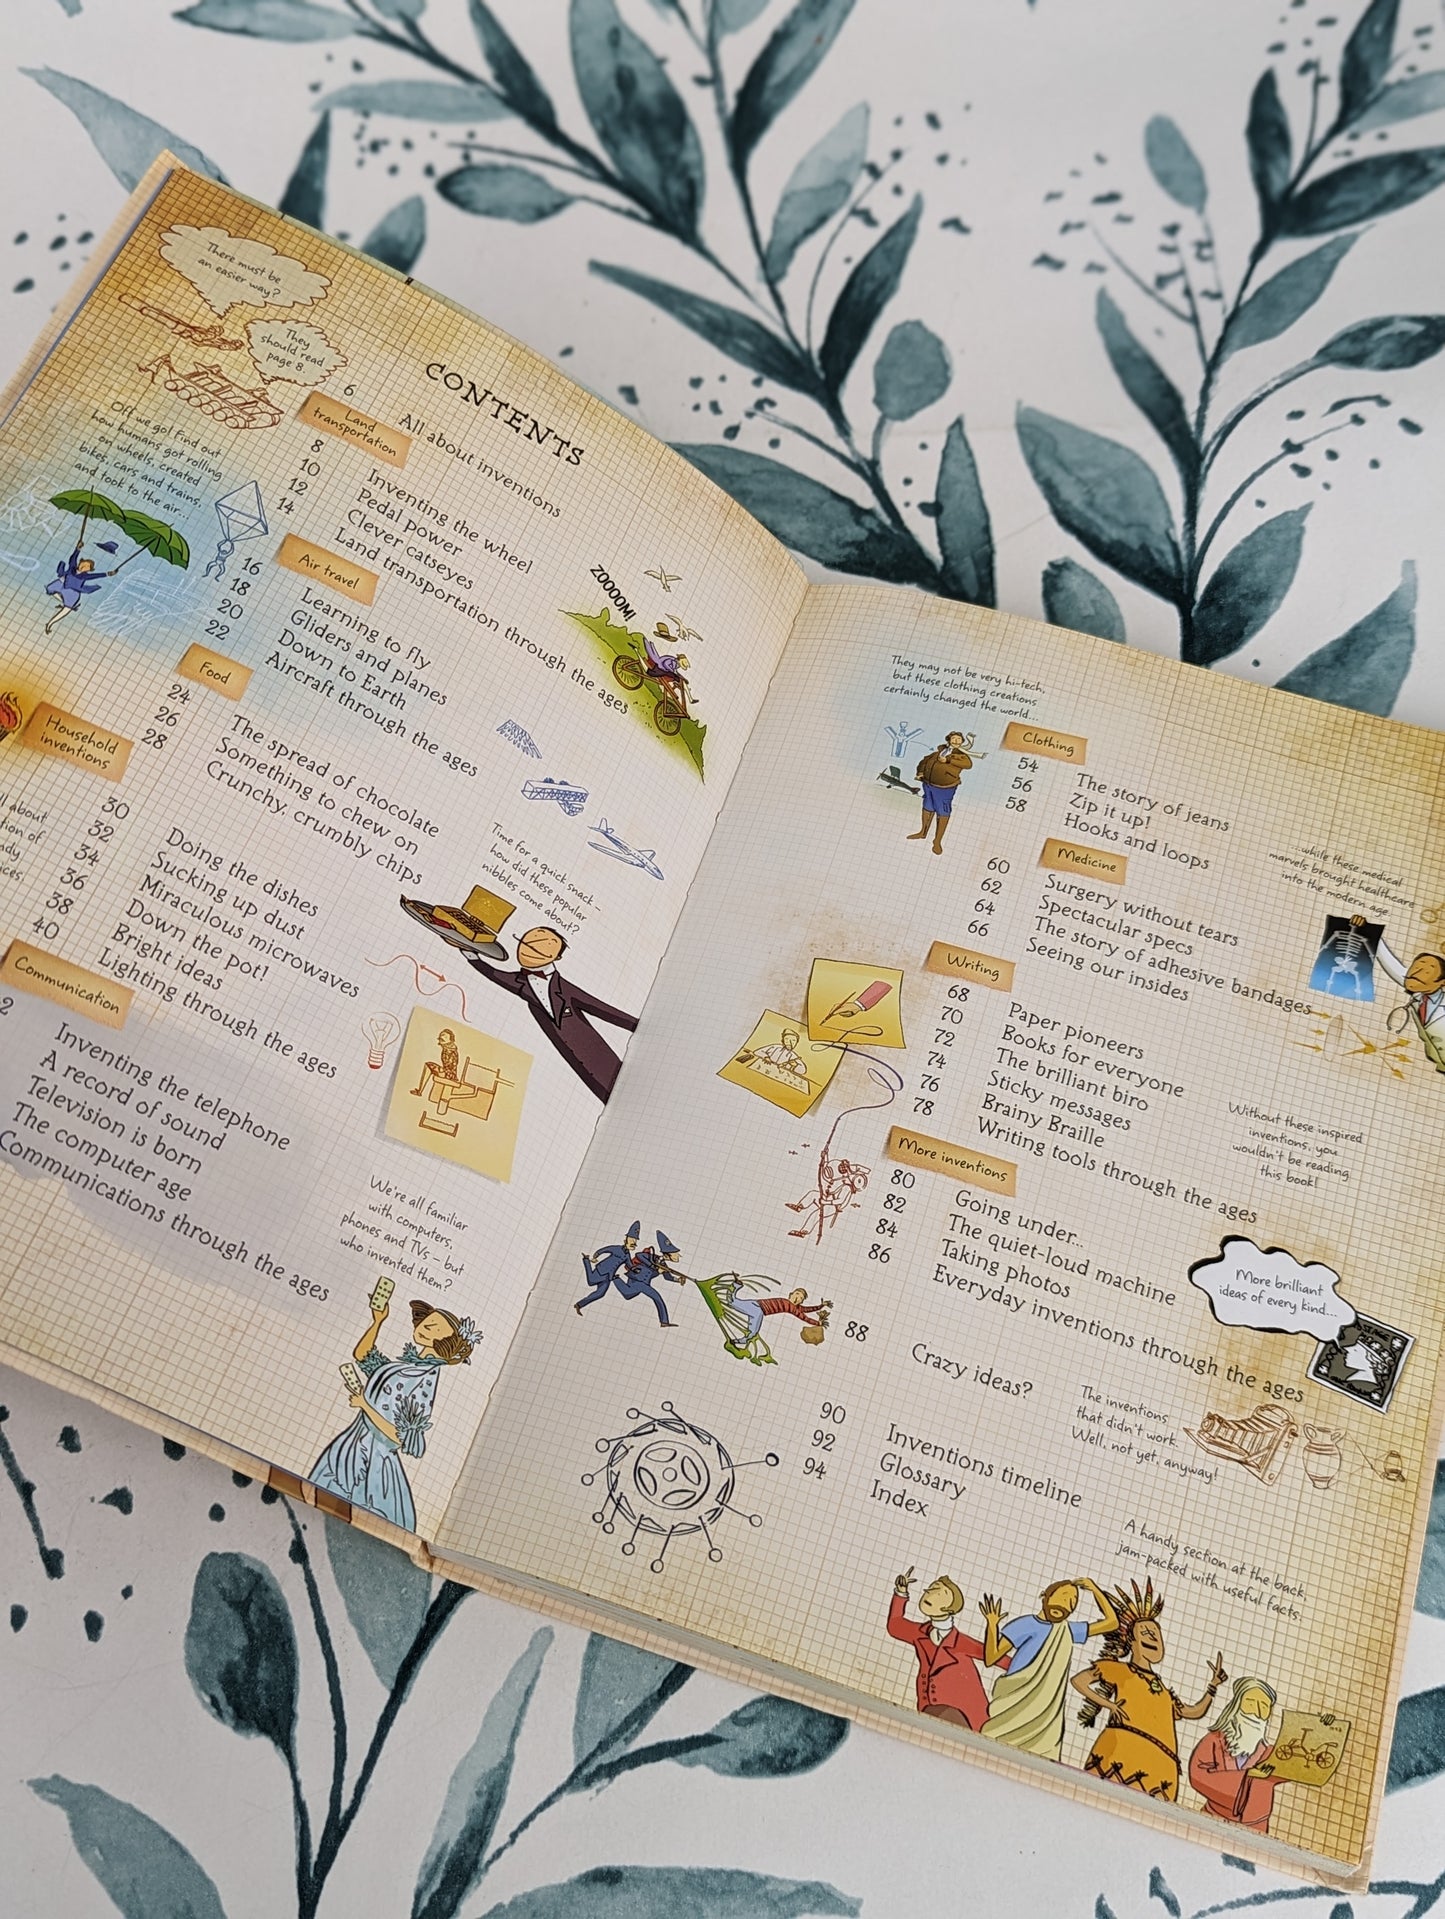 Usborne's The Story of Inventions